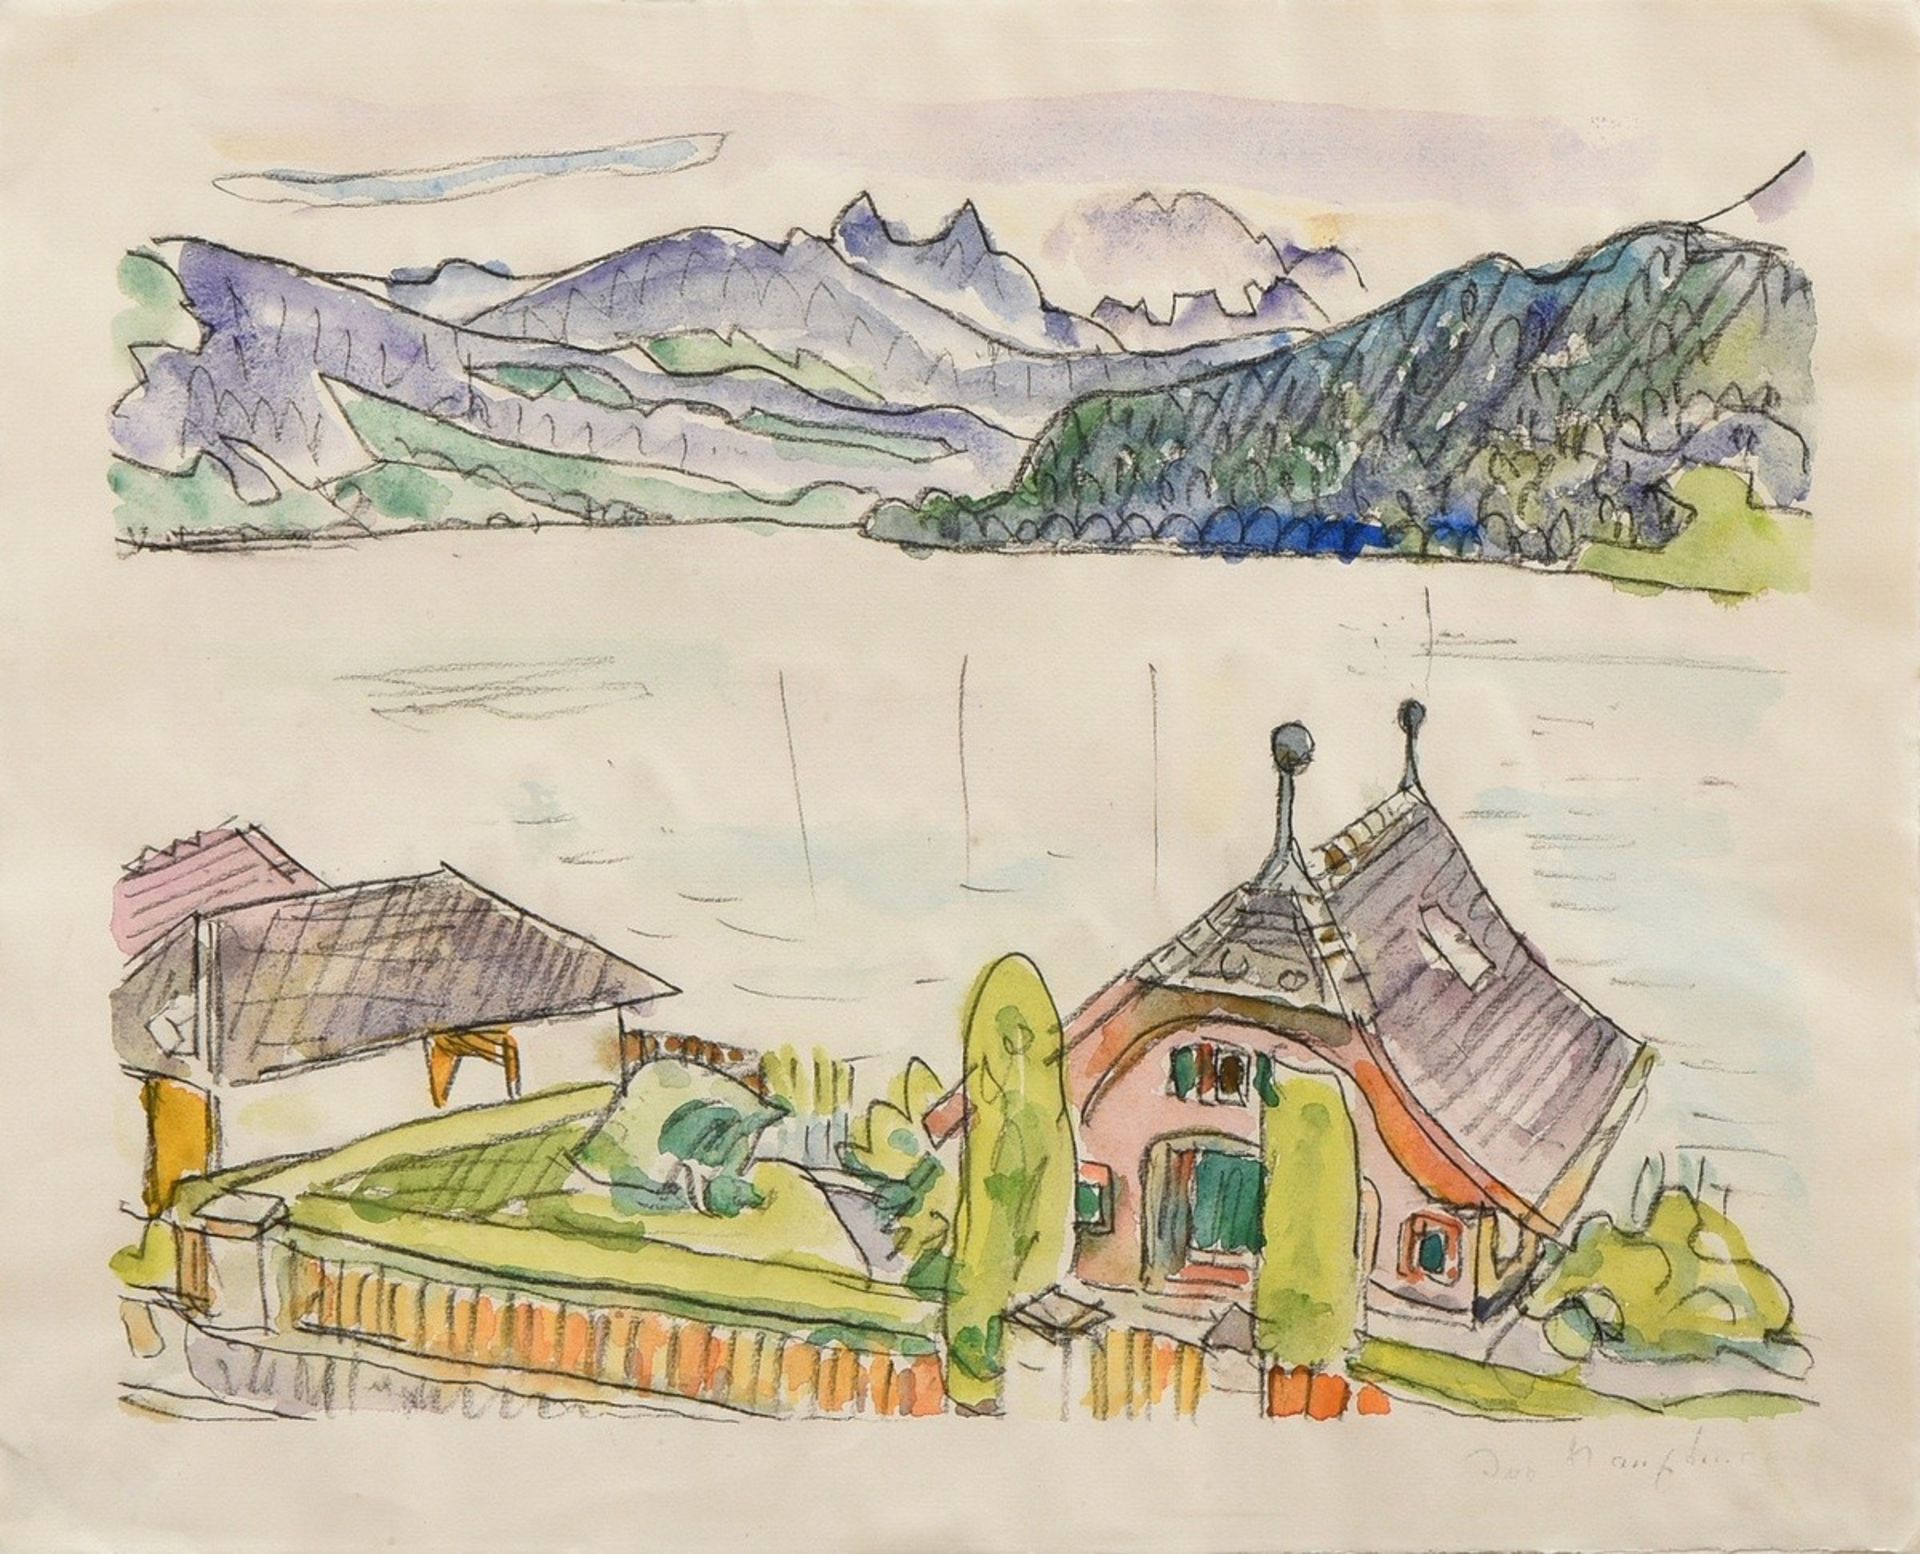 Hauptmann, Ivo (1886-1973) "Gardasee"(?), charcoal/watercolour, sign. lower right, SM 38,2x46,4cm (